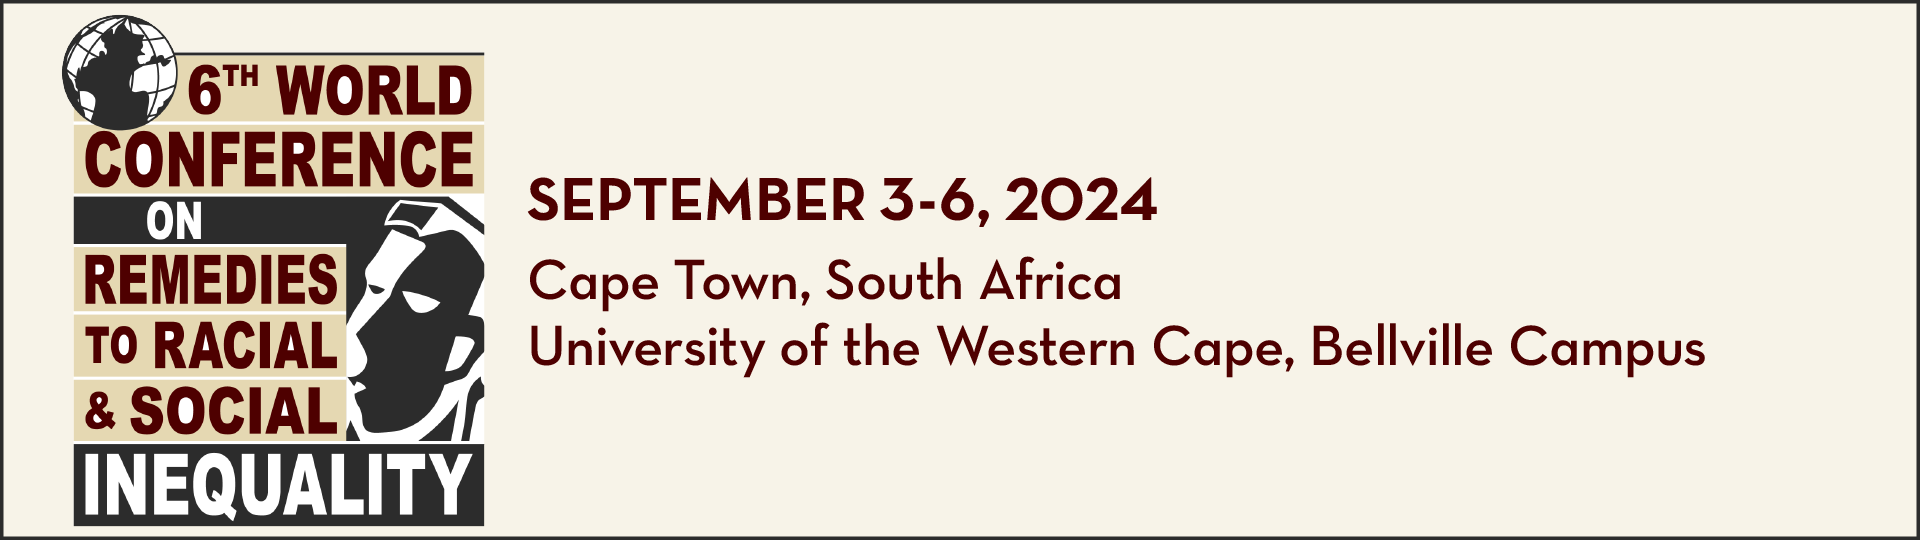 6th world conference on remedies to racial and social inequity. Cape Town, South Africa, on September 3-6, 2024 